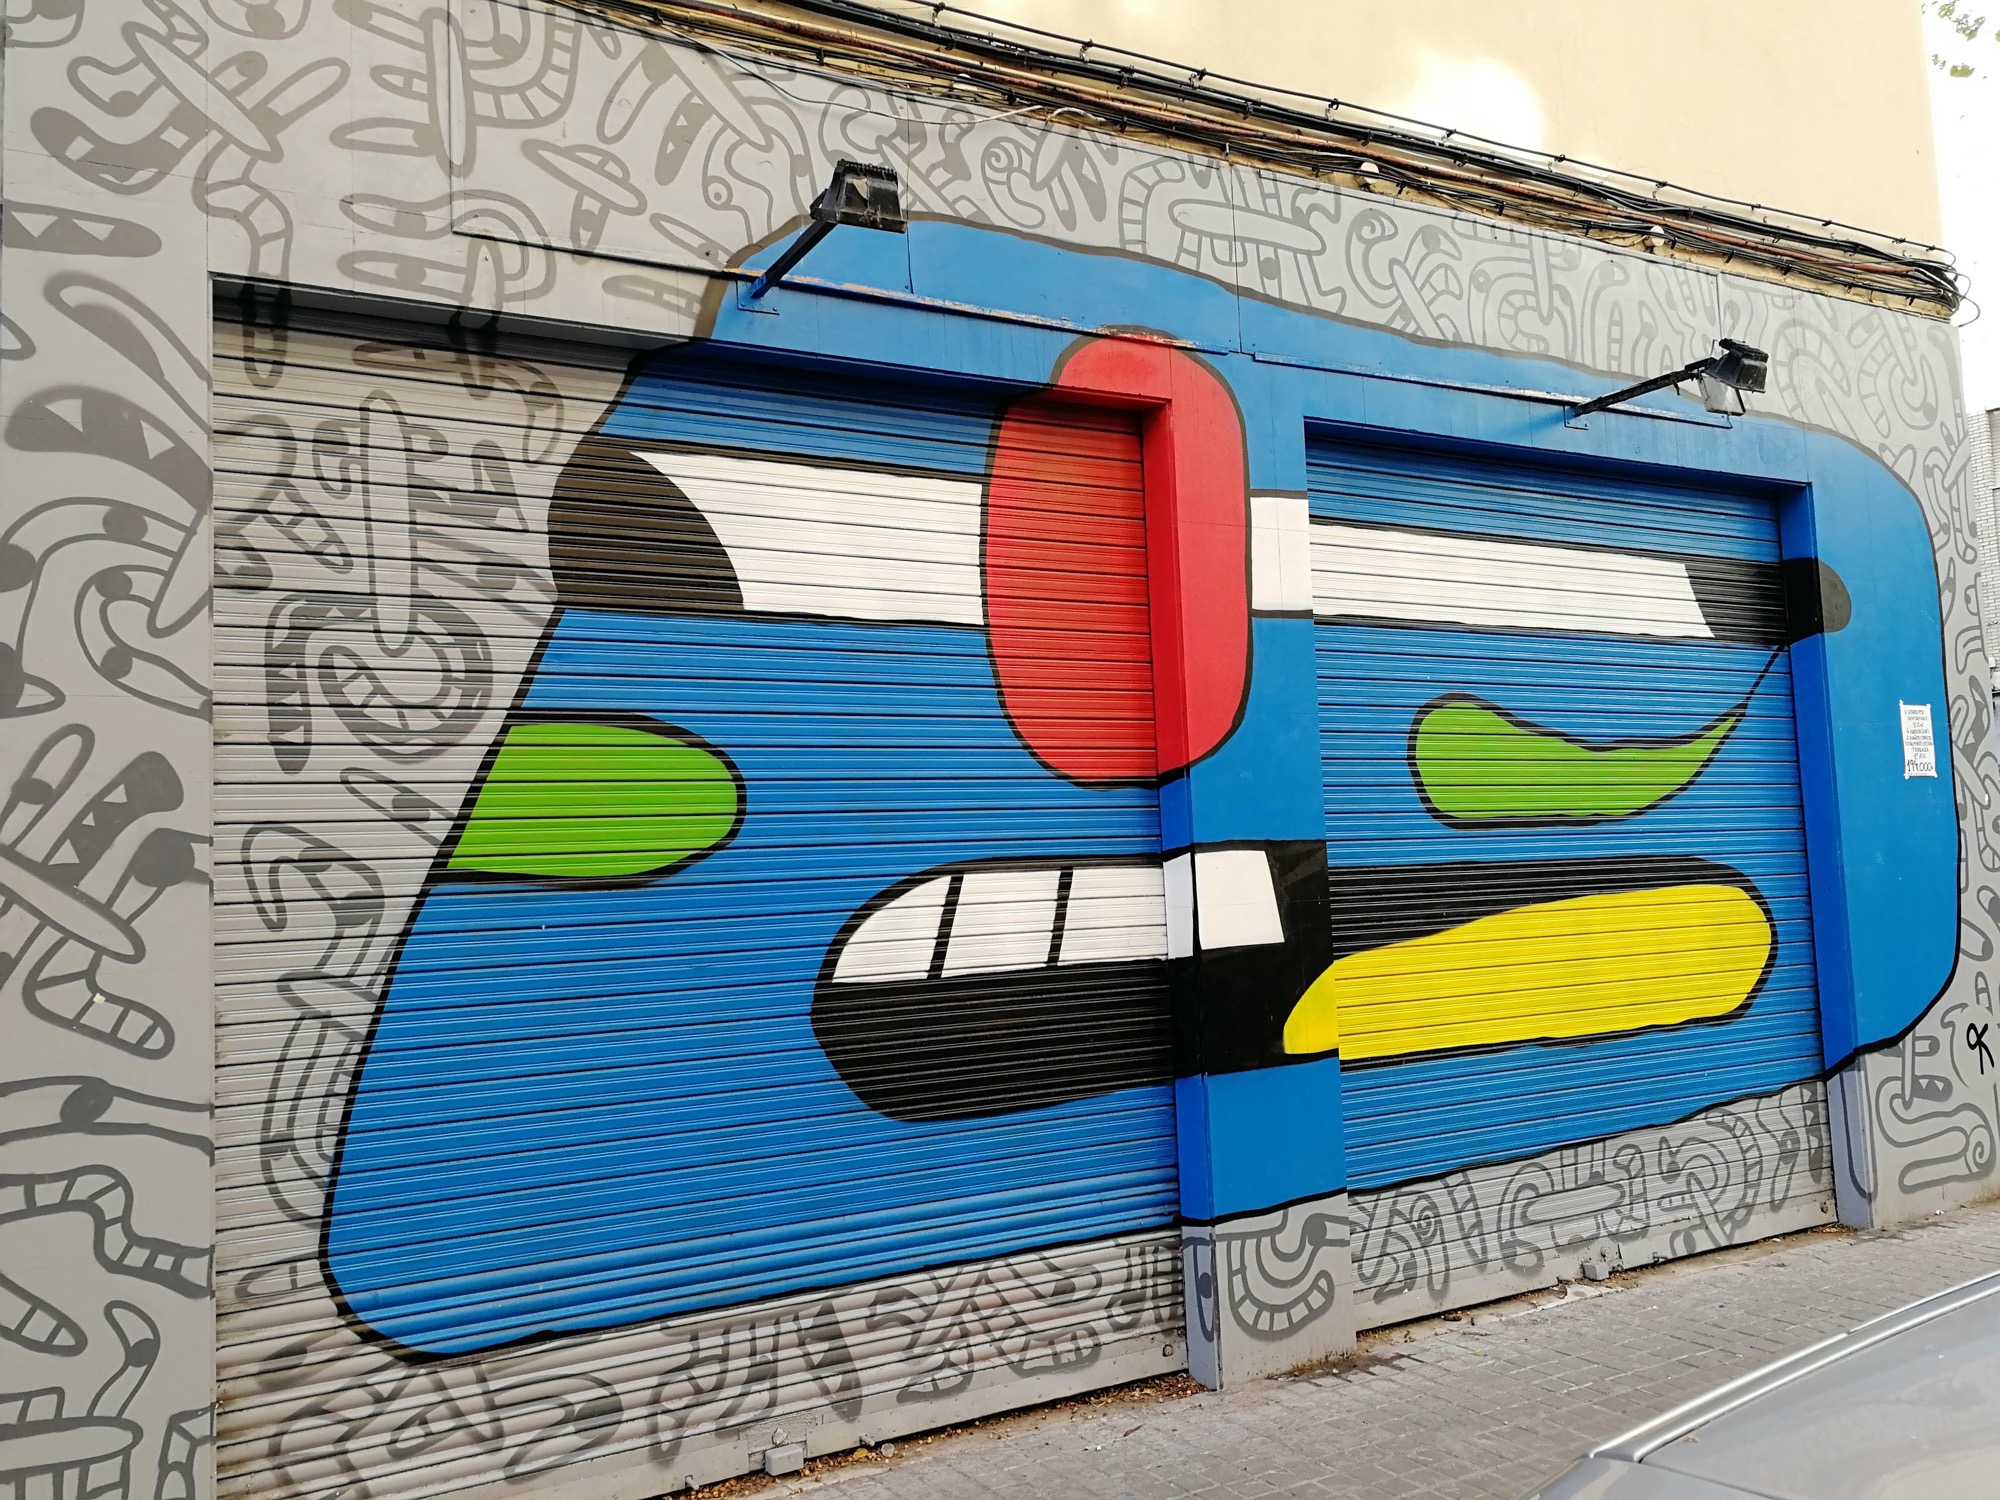 Graffiti 3553  captured by Rabot in València Spain